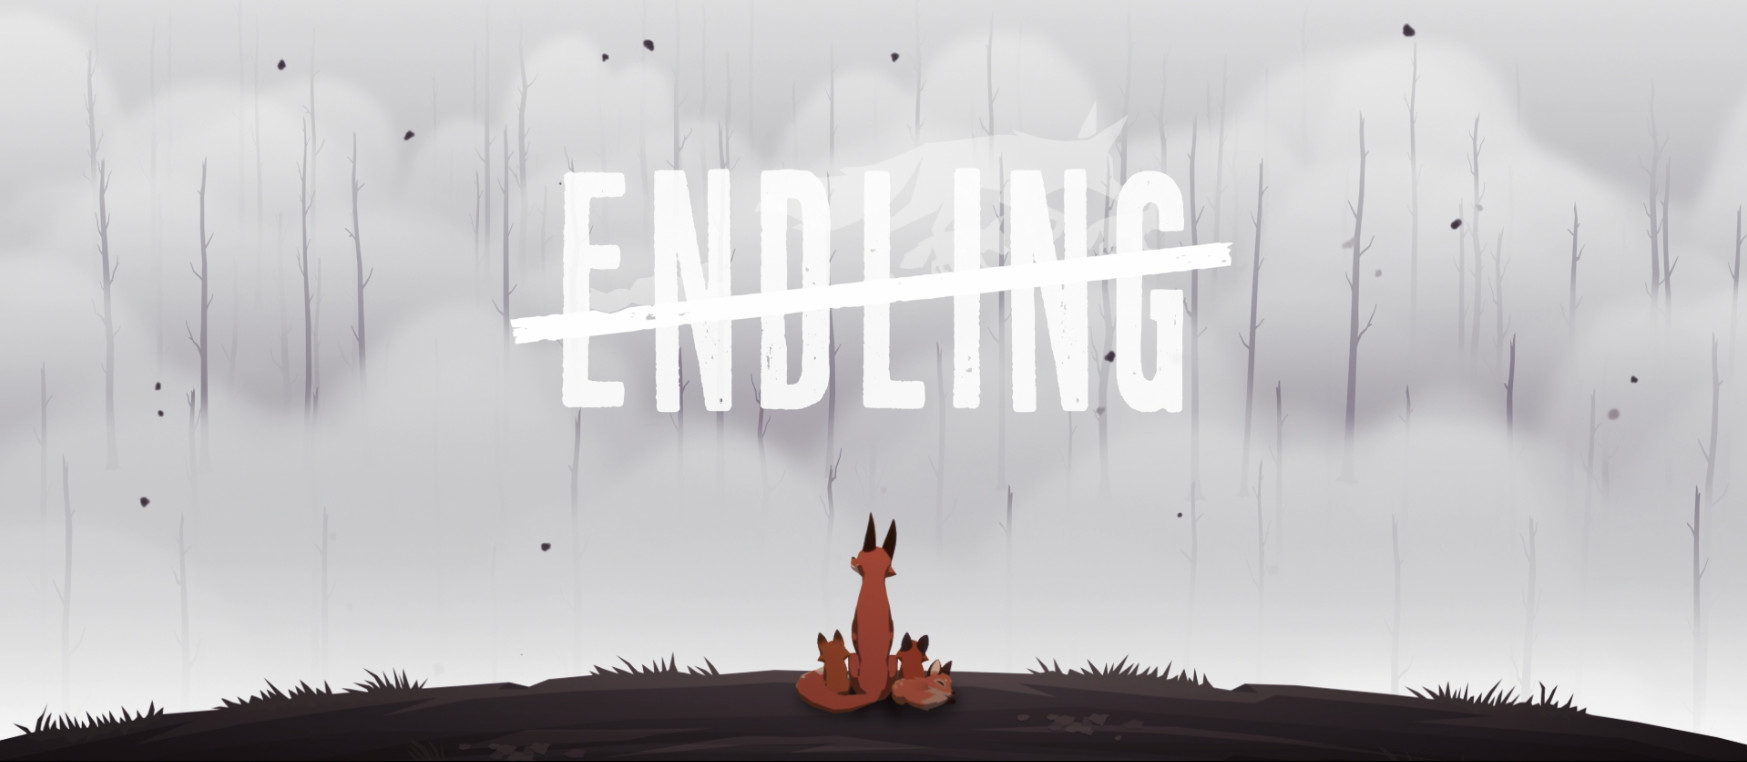 endling switch release date download